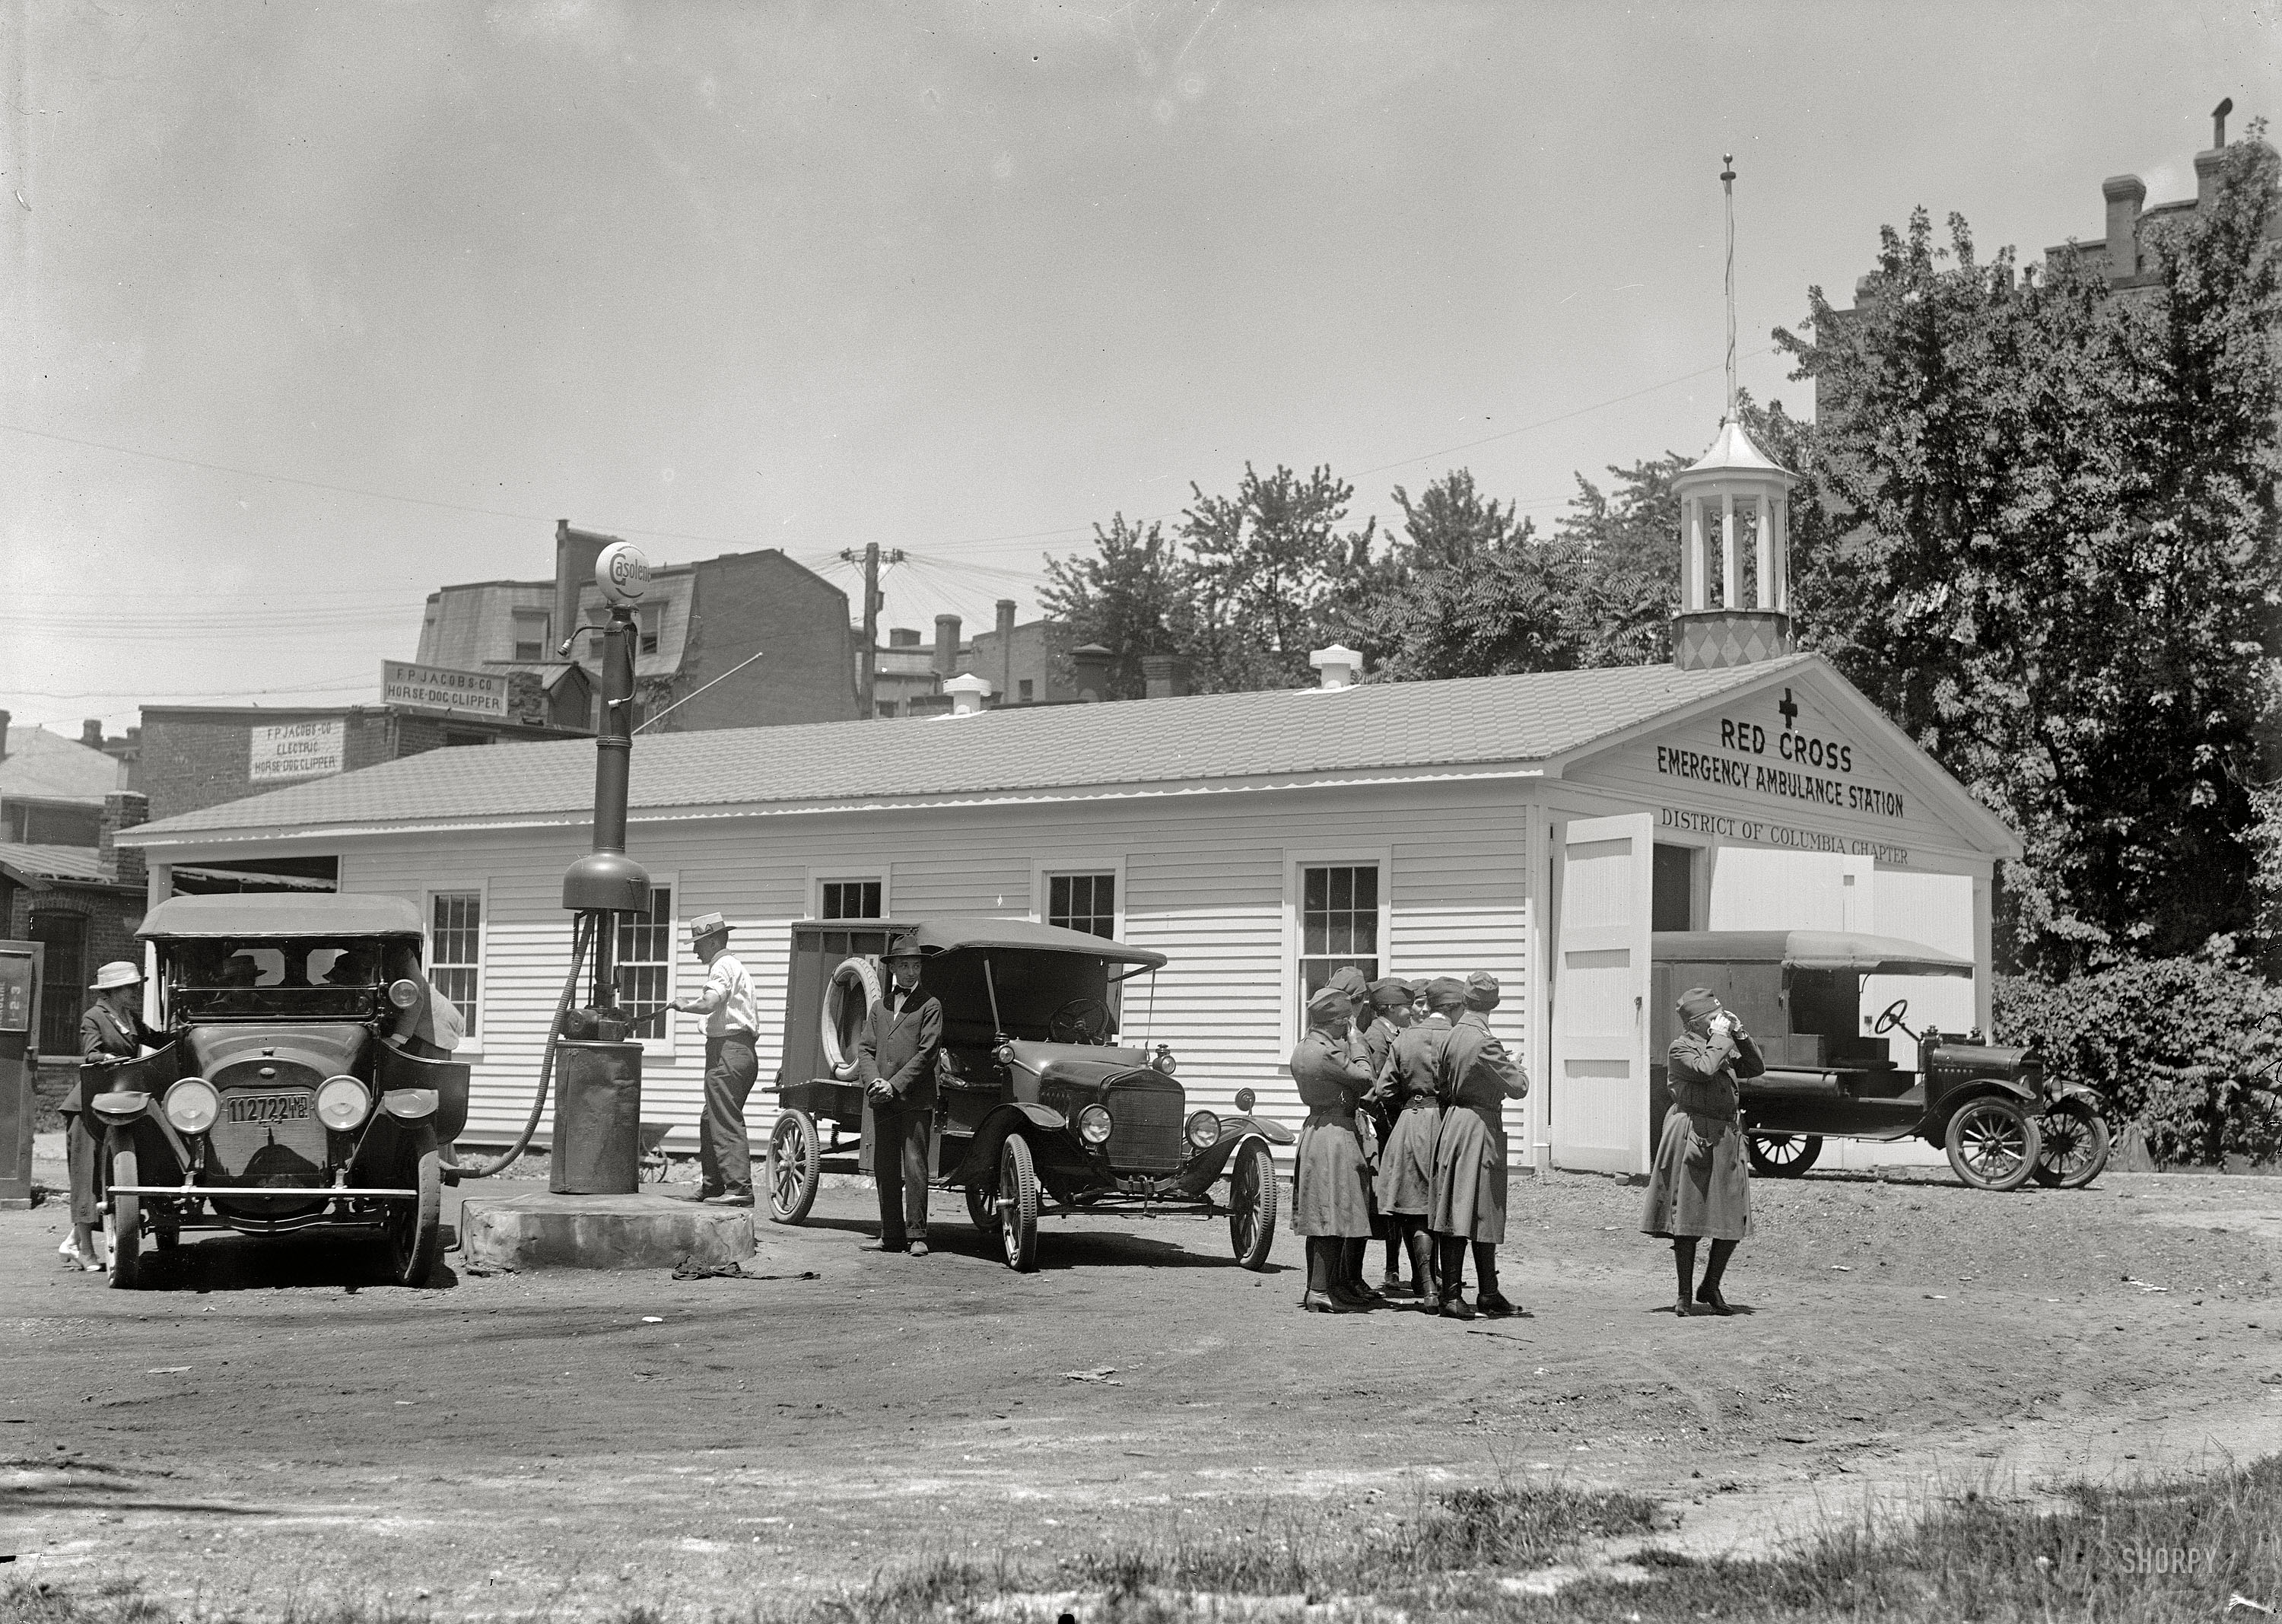 1917. Washington, D.C. "Red Cross emergency ambulance station garage, 16th Street," conveniently next door to F.P. Jacobs, "electric horse-dog clipper."  Harris & Ewing Collection glass negative, Library of Congress. View full size.